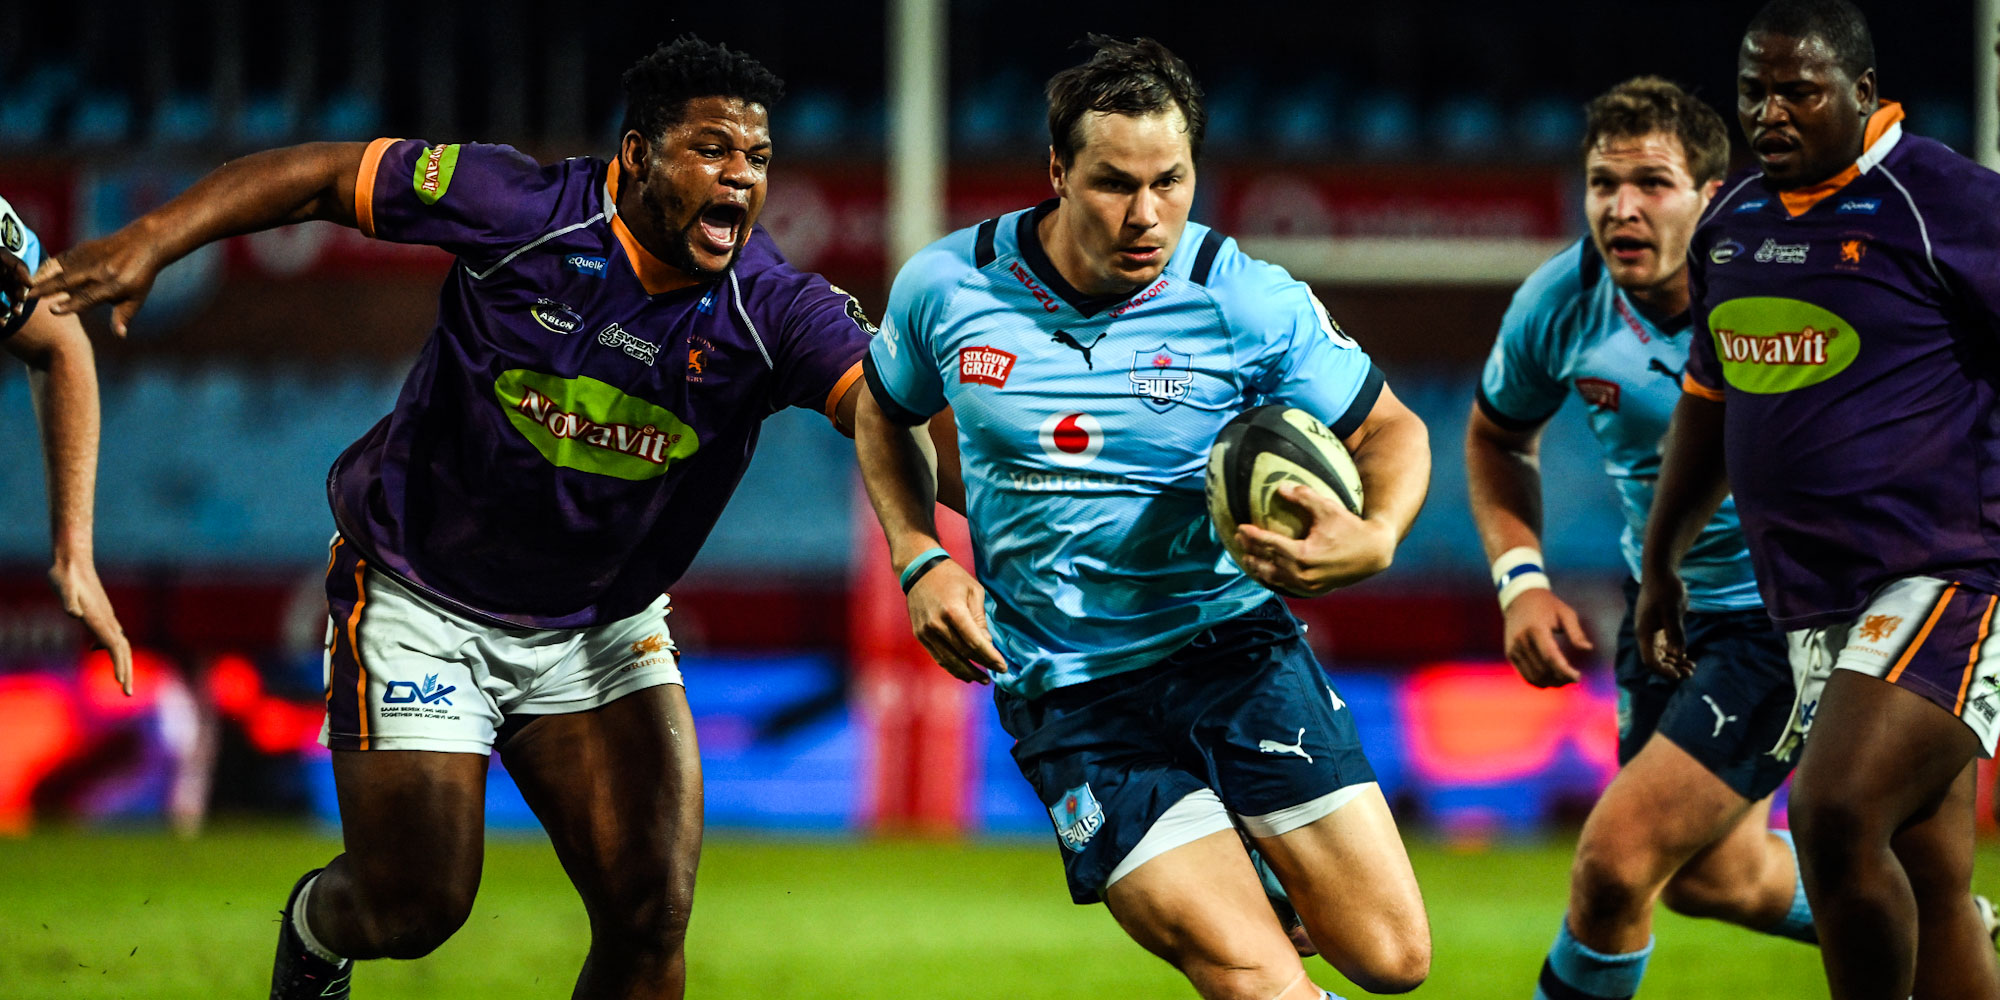 The Vodacom Bulls' Chris Smith evades a tackle from the NovaVit Griffons.